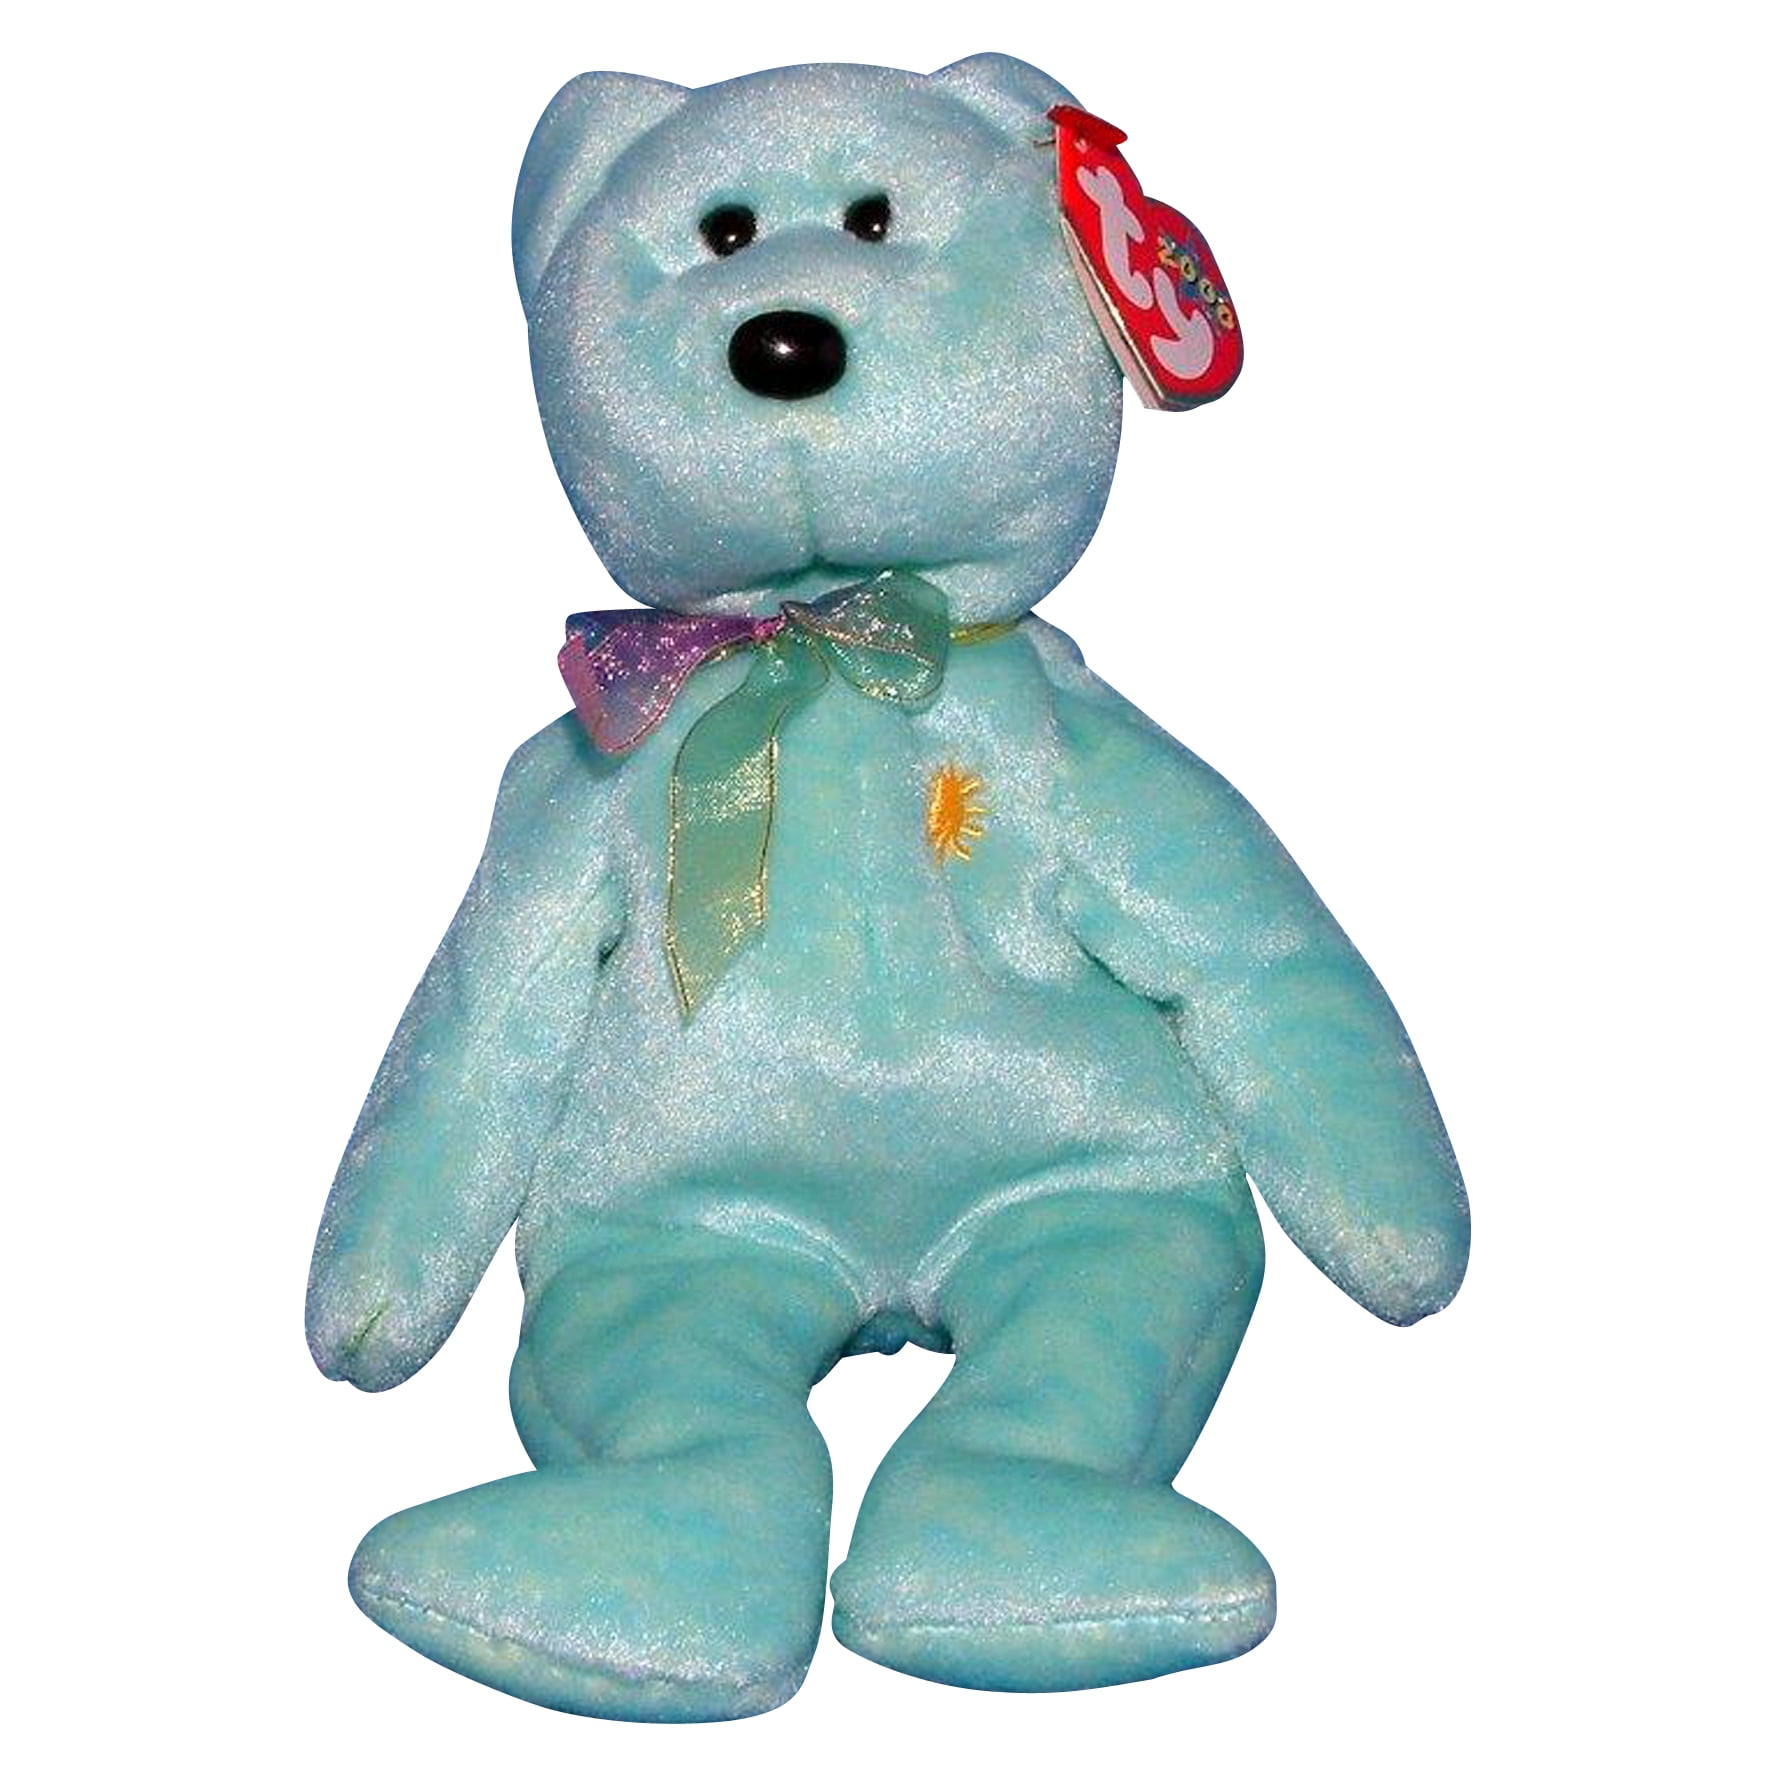 Ariel the Bear Plush Toy for sale online TY Beanie Babies 